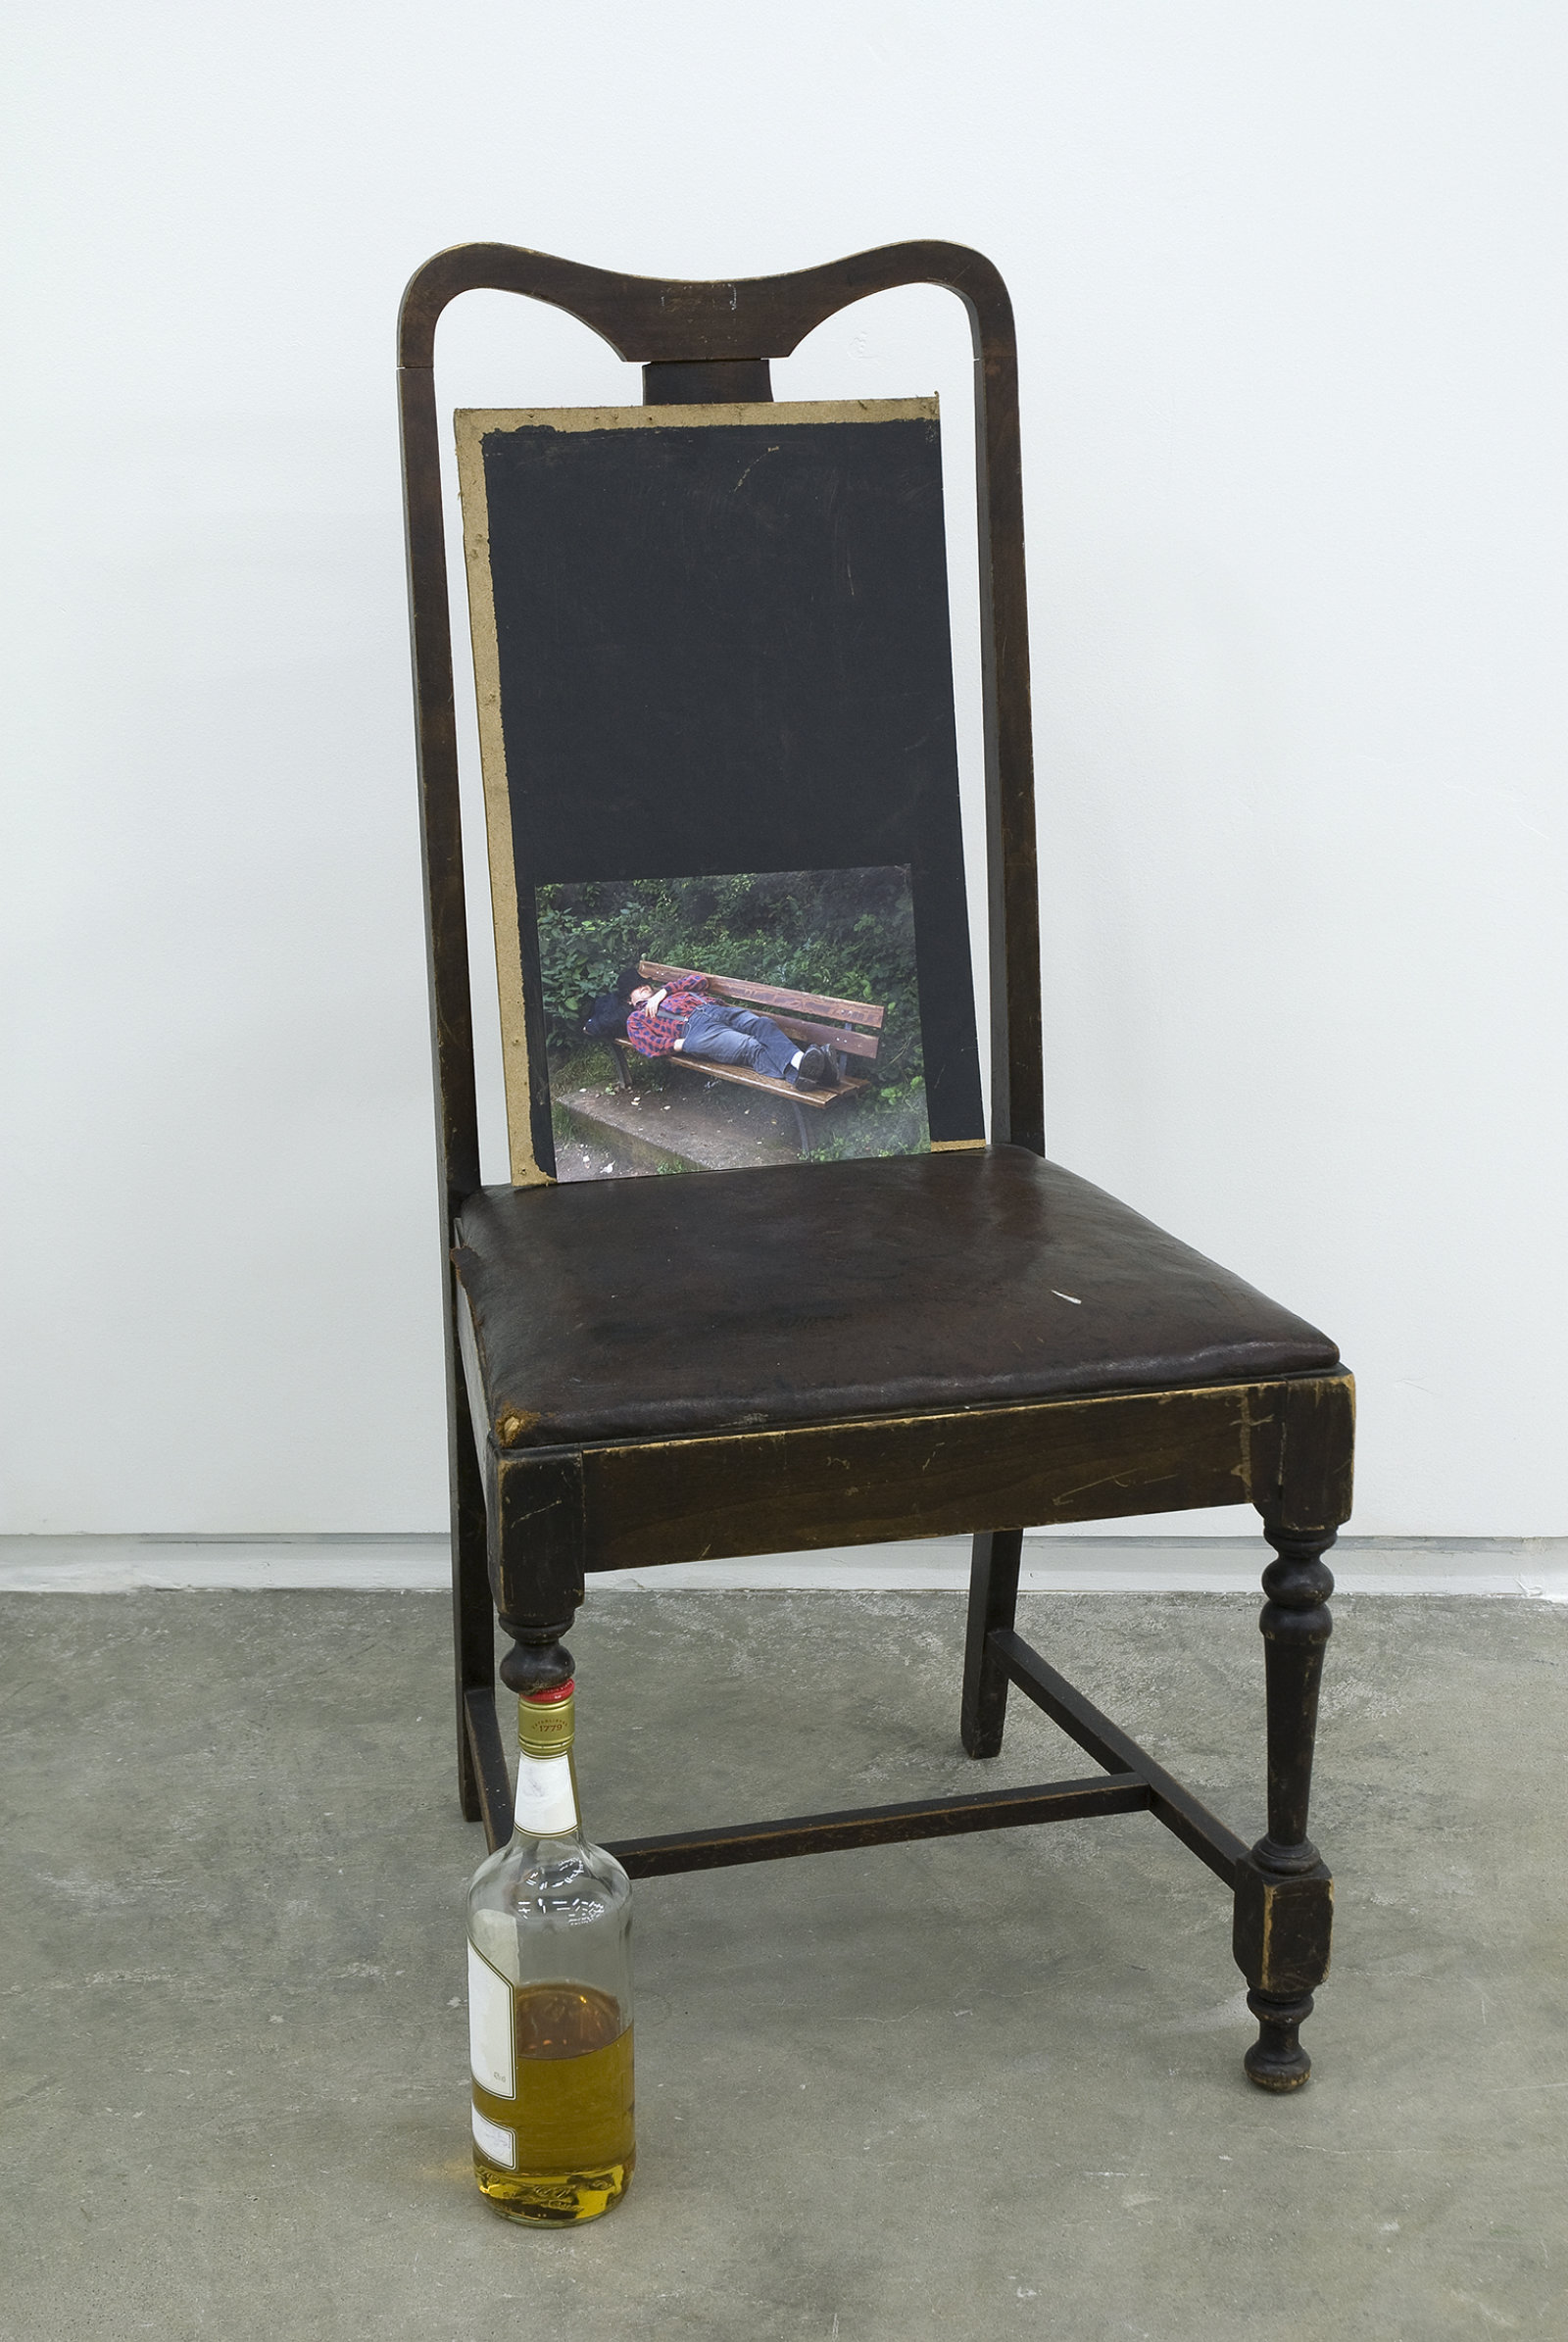 Ashes Withyman, Untitled from Uncertain Pilgrimage, 2009, broken chair, whiskey, paint, wood, ‘Friend in Theatre, Asleep’ lightjet print, 40 x 19 x 18 in. (102 x 47 x 44 cm)